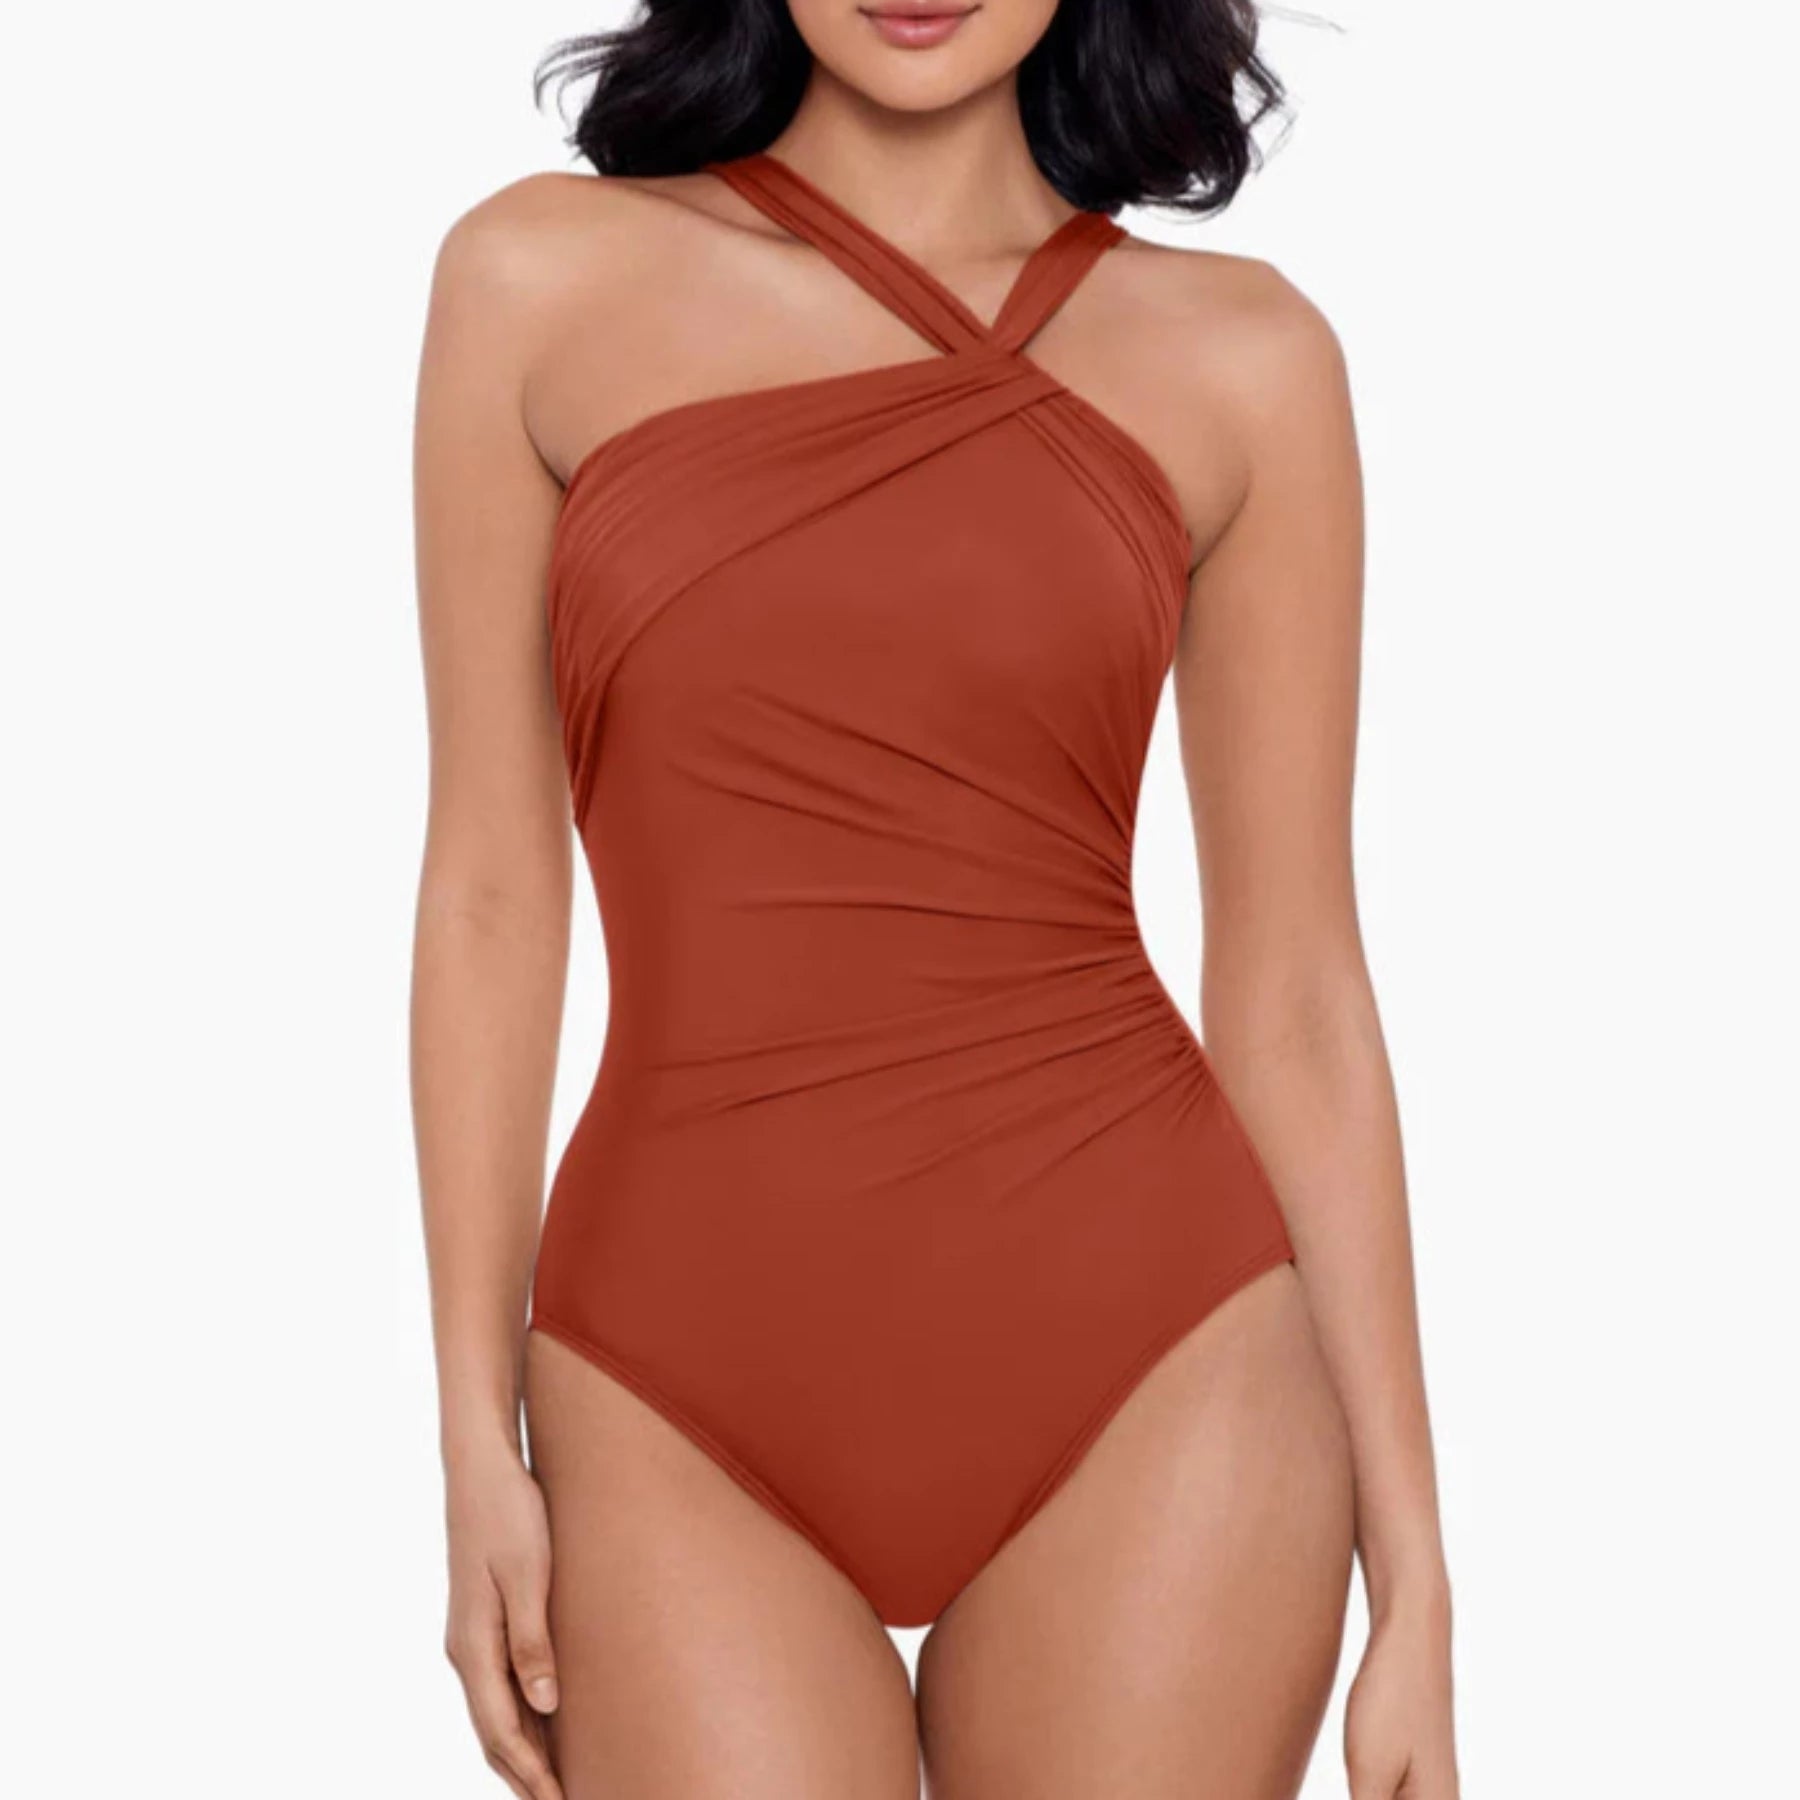 Rock Solid Europa Underwire One Piece Swimsuit 6537021 - Spice